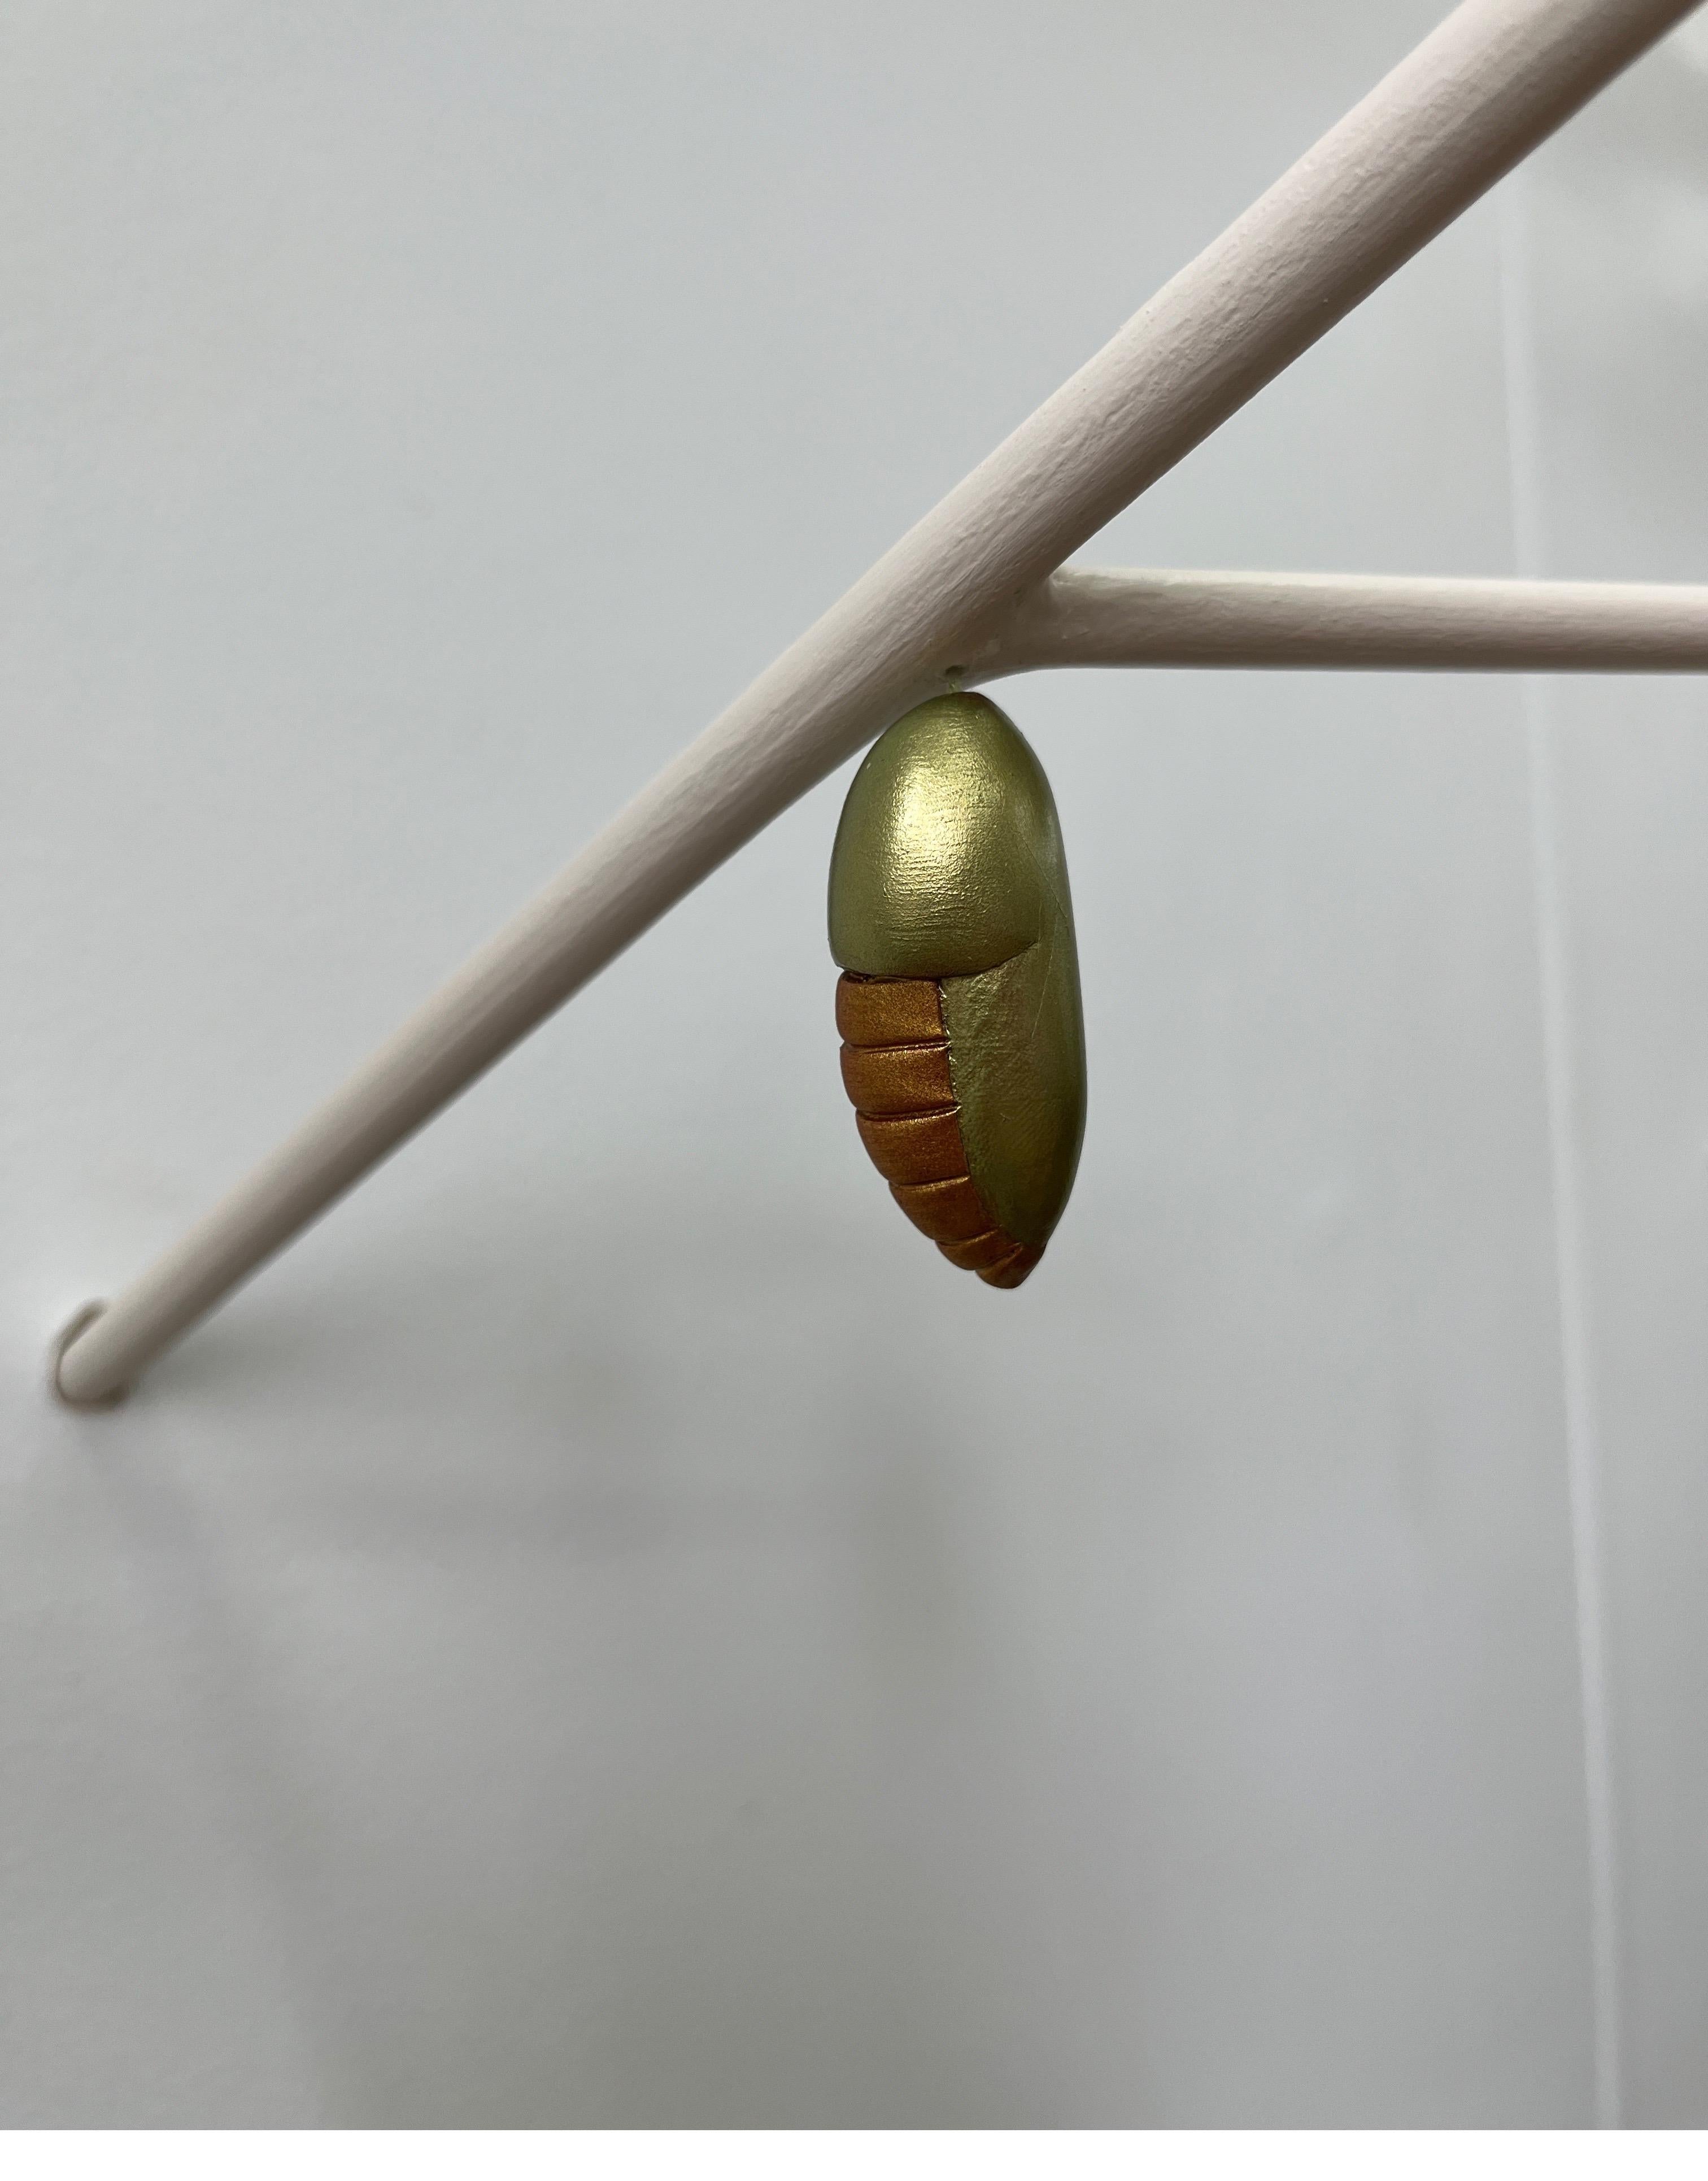 A beautiful chrysalis meticulously hand-sculpted in epoxy clay and painted with high quality metallic paint by New York artist Bethany Krull, hangs delicately from a minimalist branch.  The intimate piece extends itself from the wall into the space